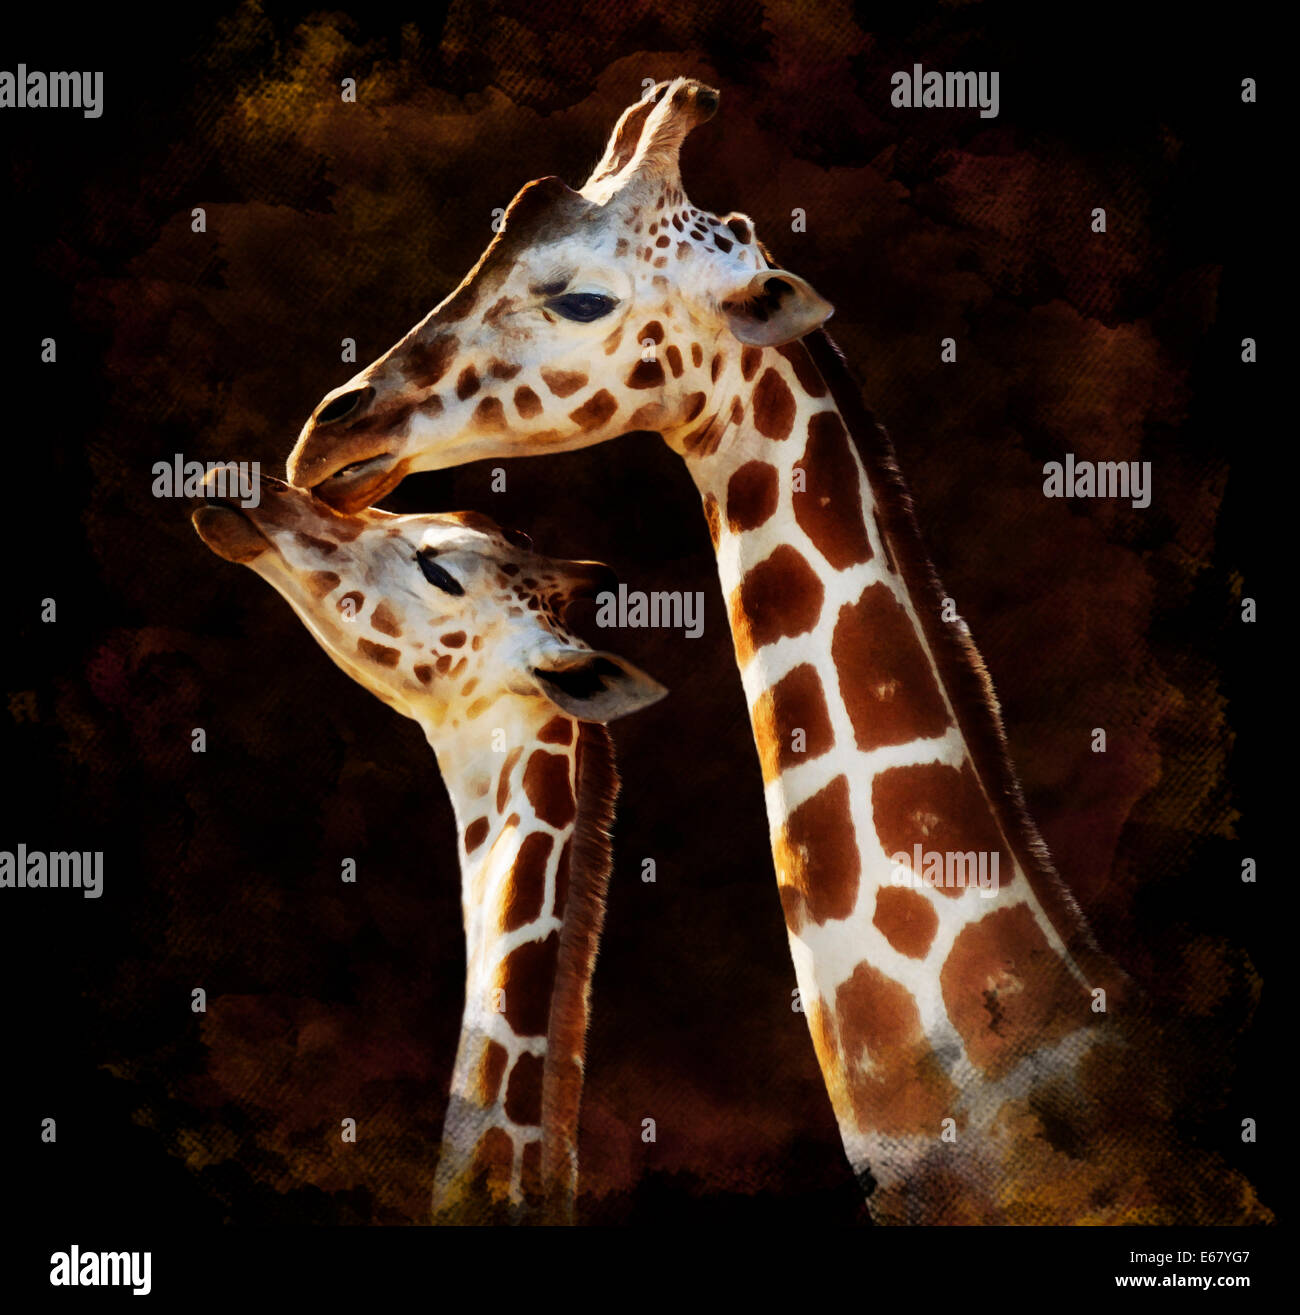 Watercolor Digital Painting Of  Mother And Baby Giraffes On Dark Background Stock Photo